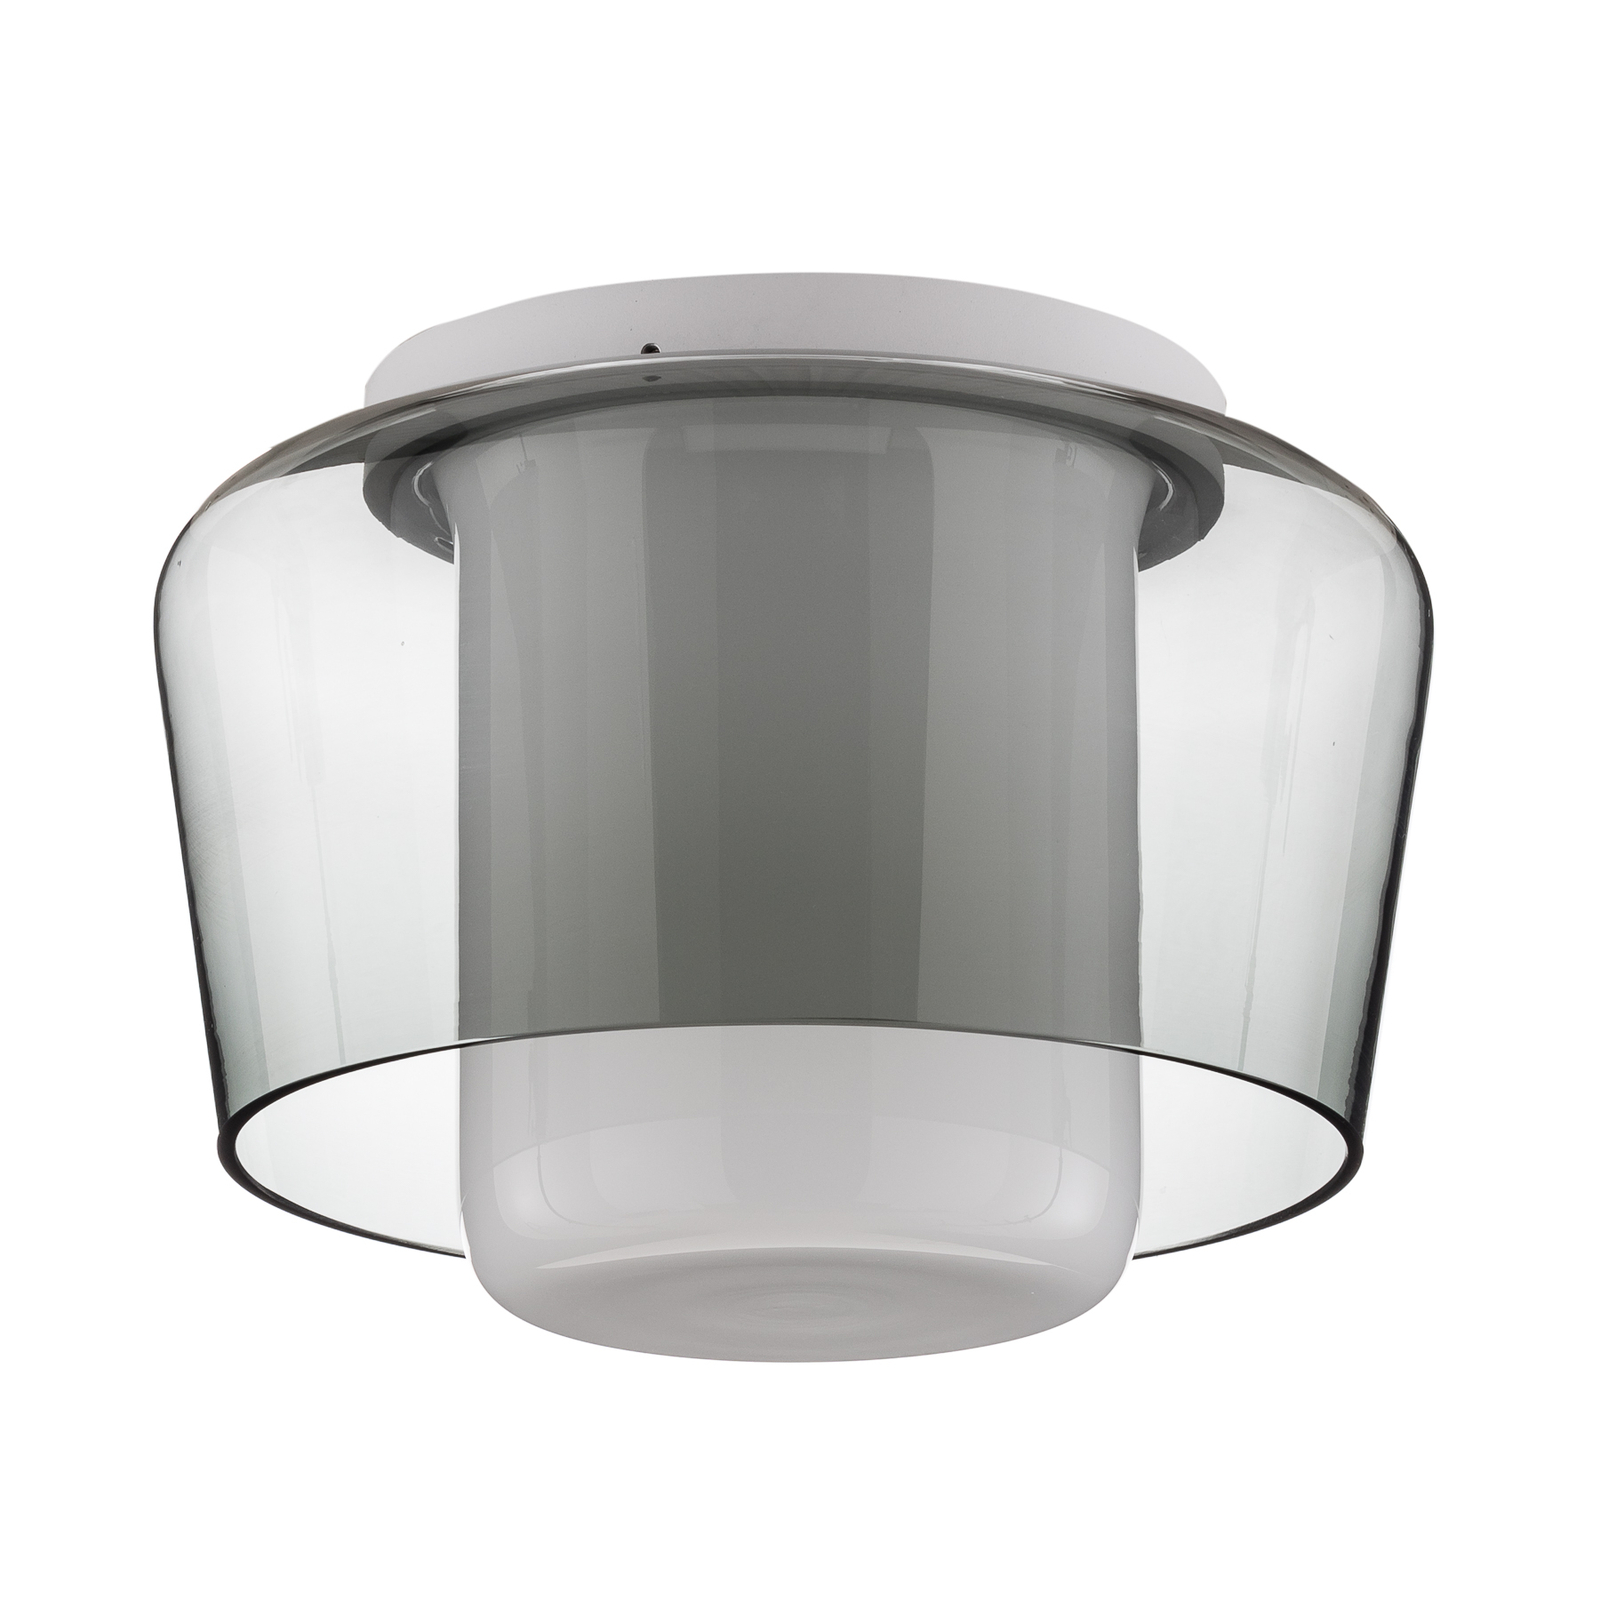 Ceiling light Canio with double glass